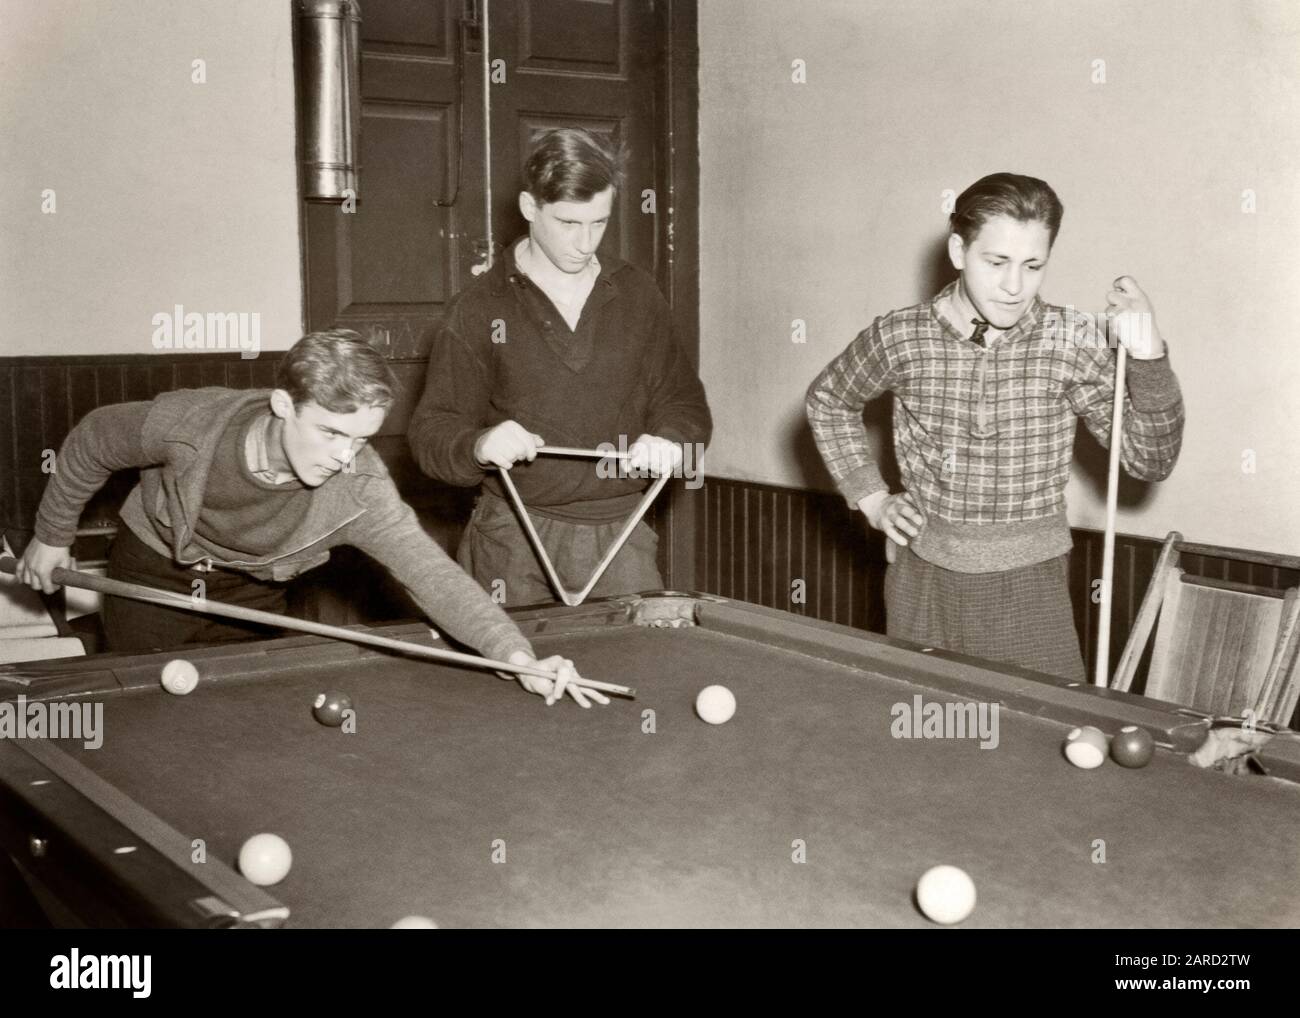 Teenage boys playing pool High Resolution Stock Photography and Images ...